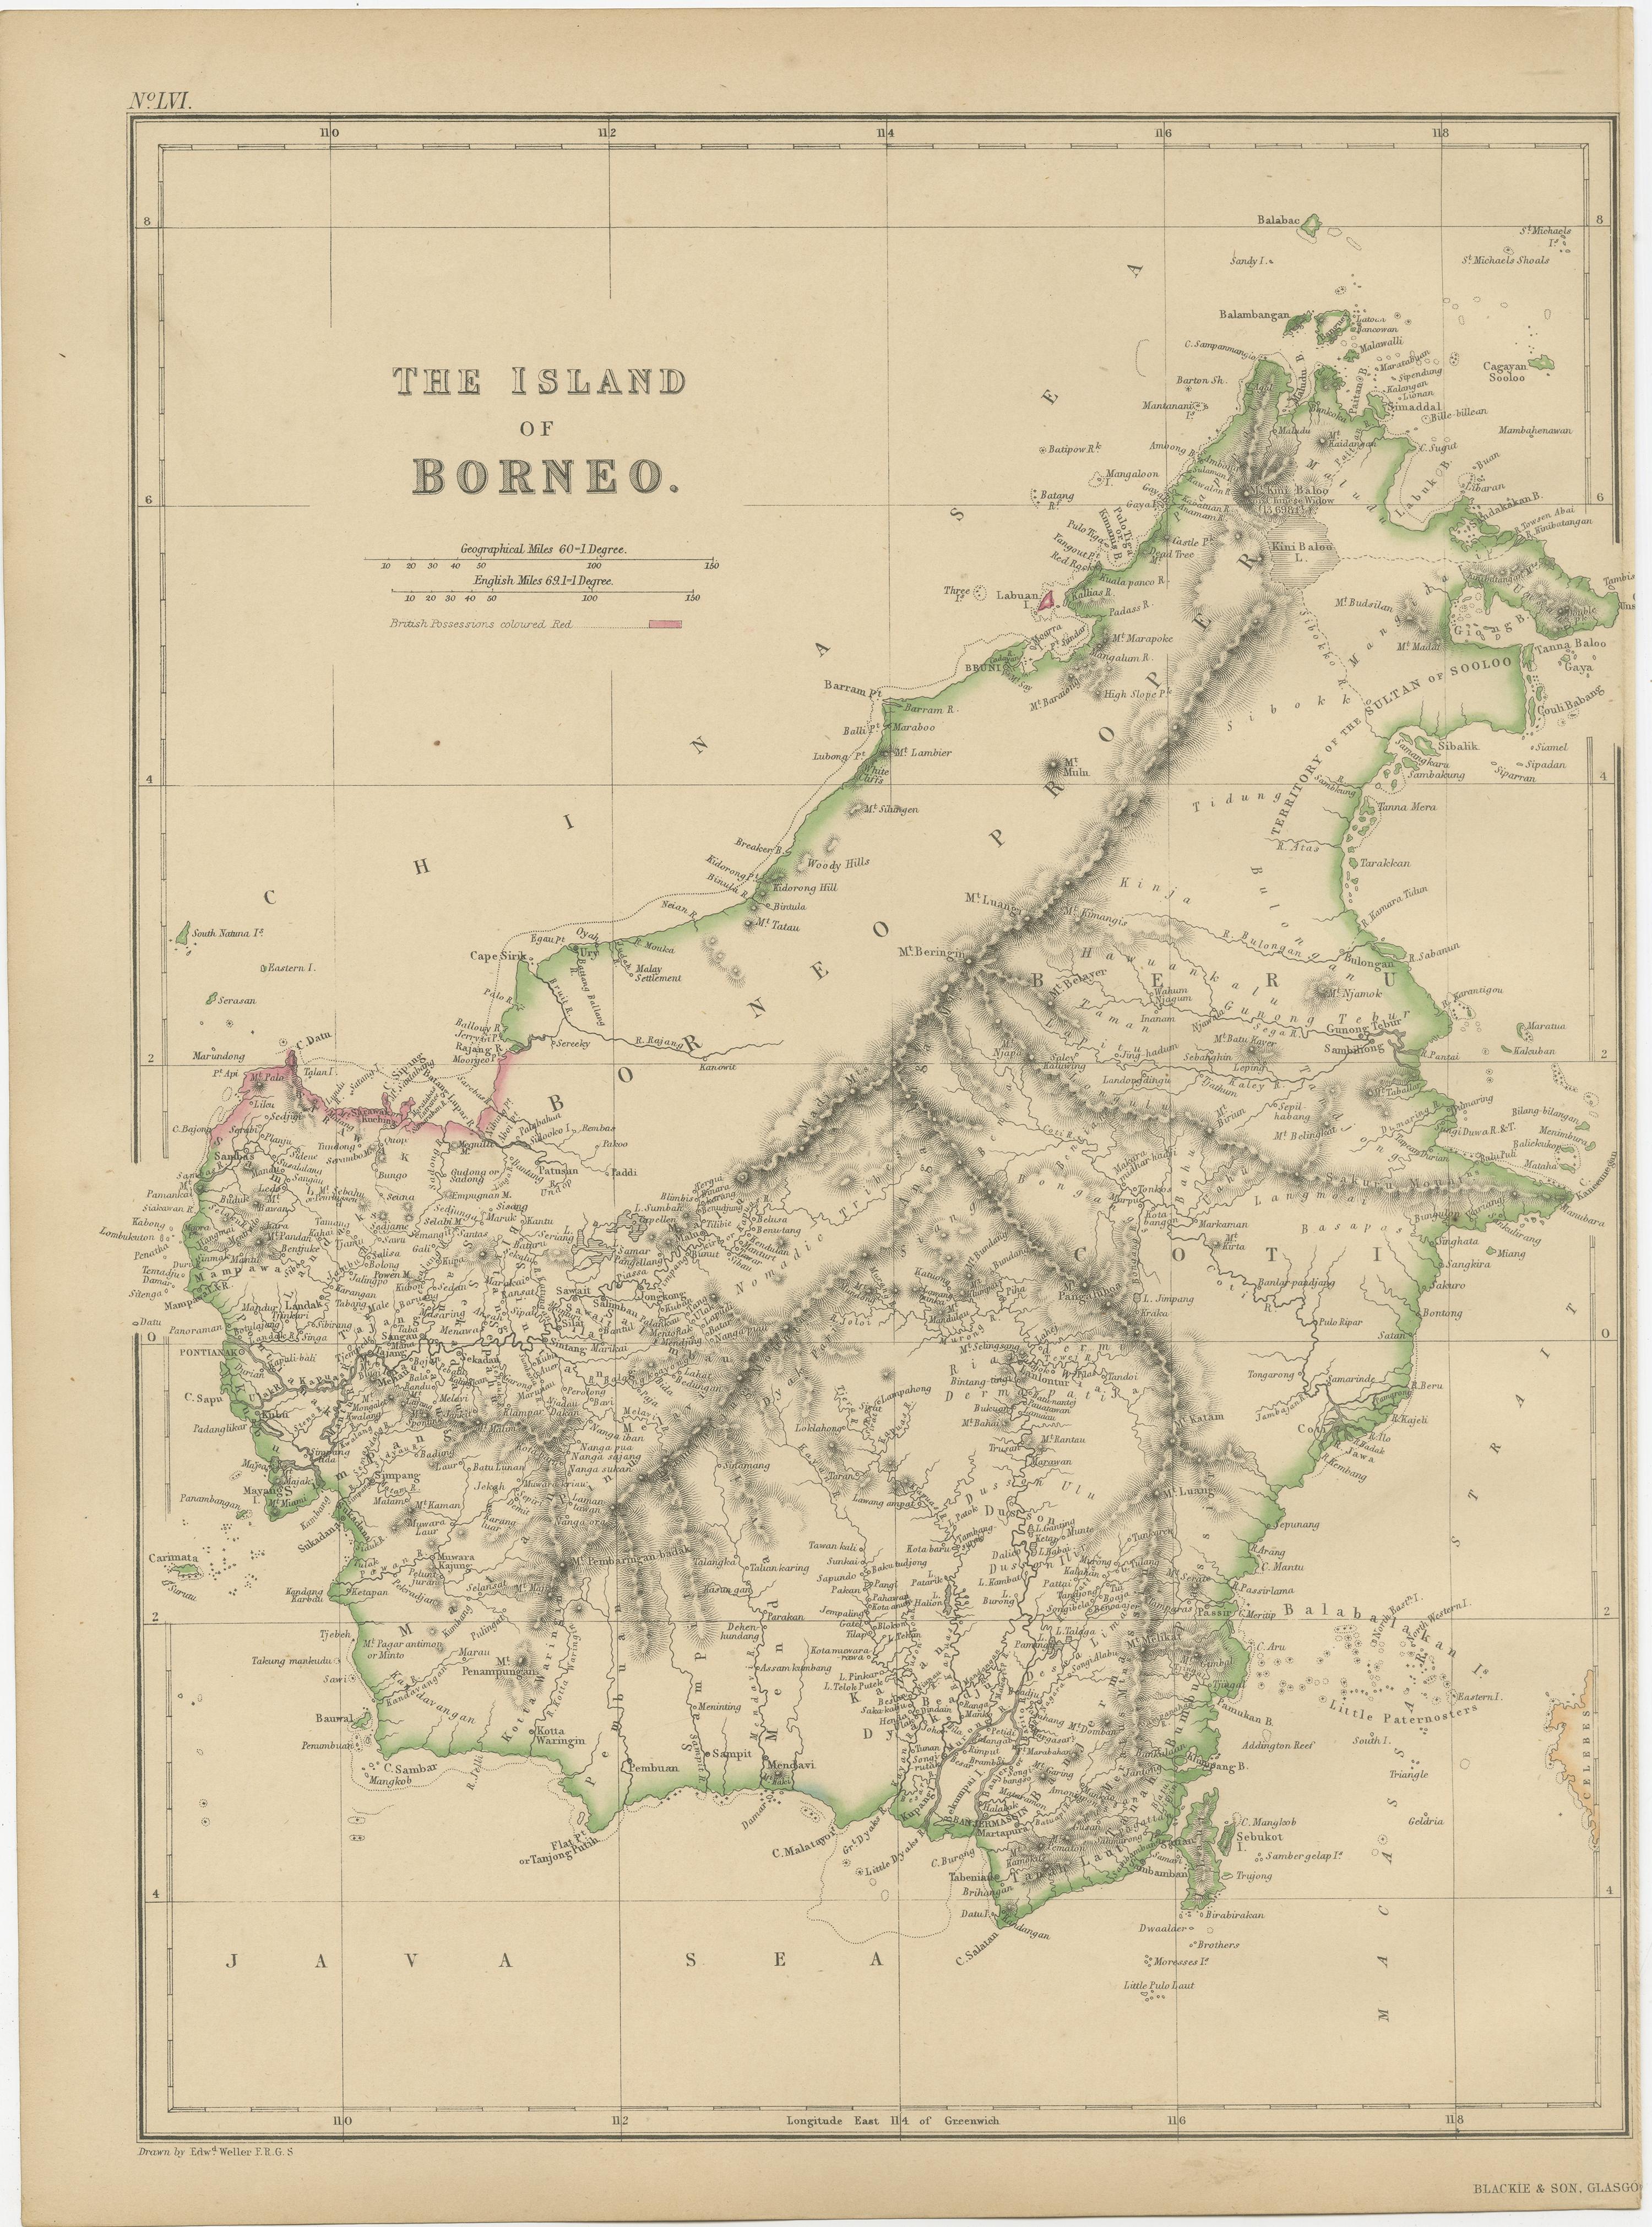 Antique map titled 'The Island of Borneo'. Original antique map of the Island of Borneo. This map originates from ‘The Imperial Atlas of Modern Geography’. Published by W. G. Blackie, 1859.